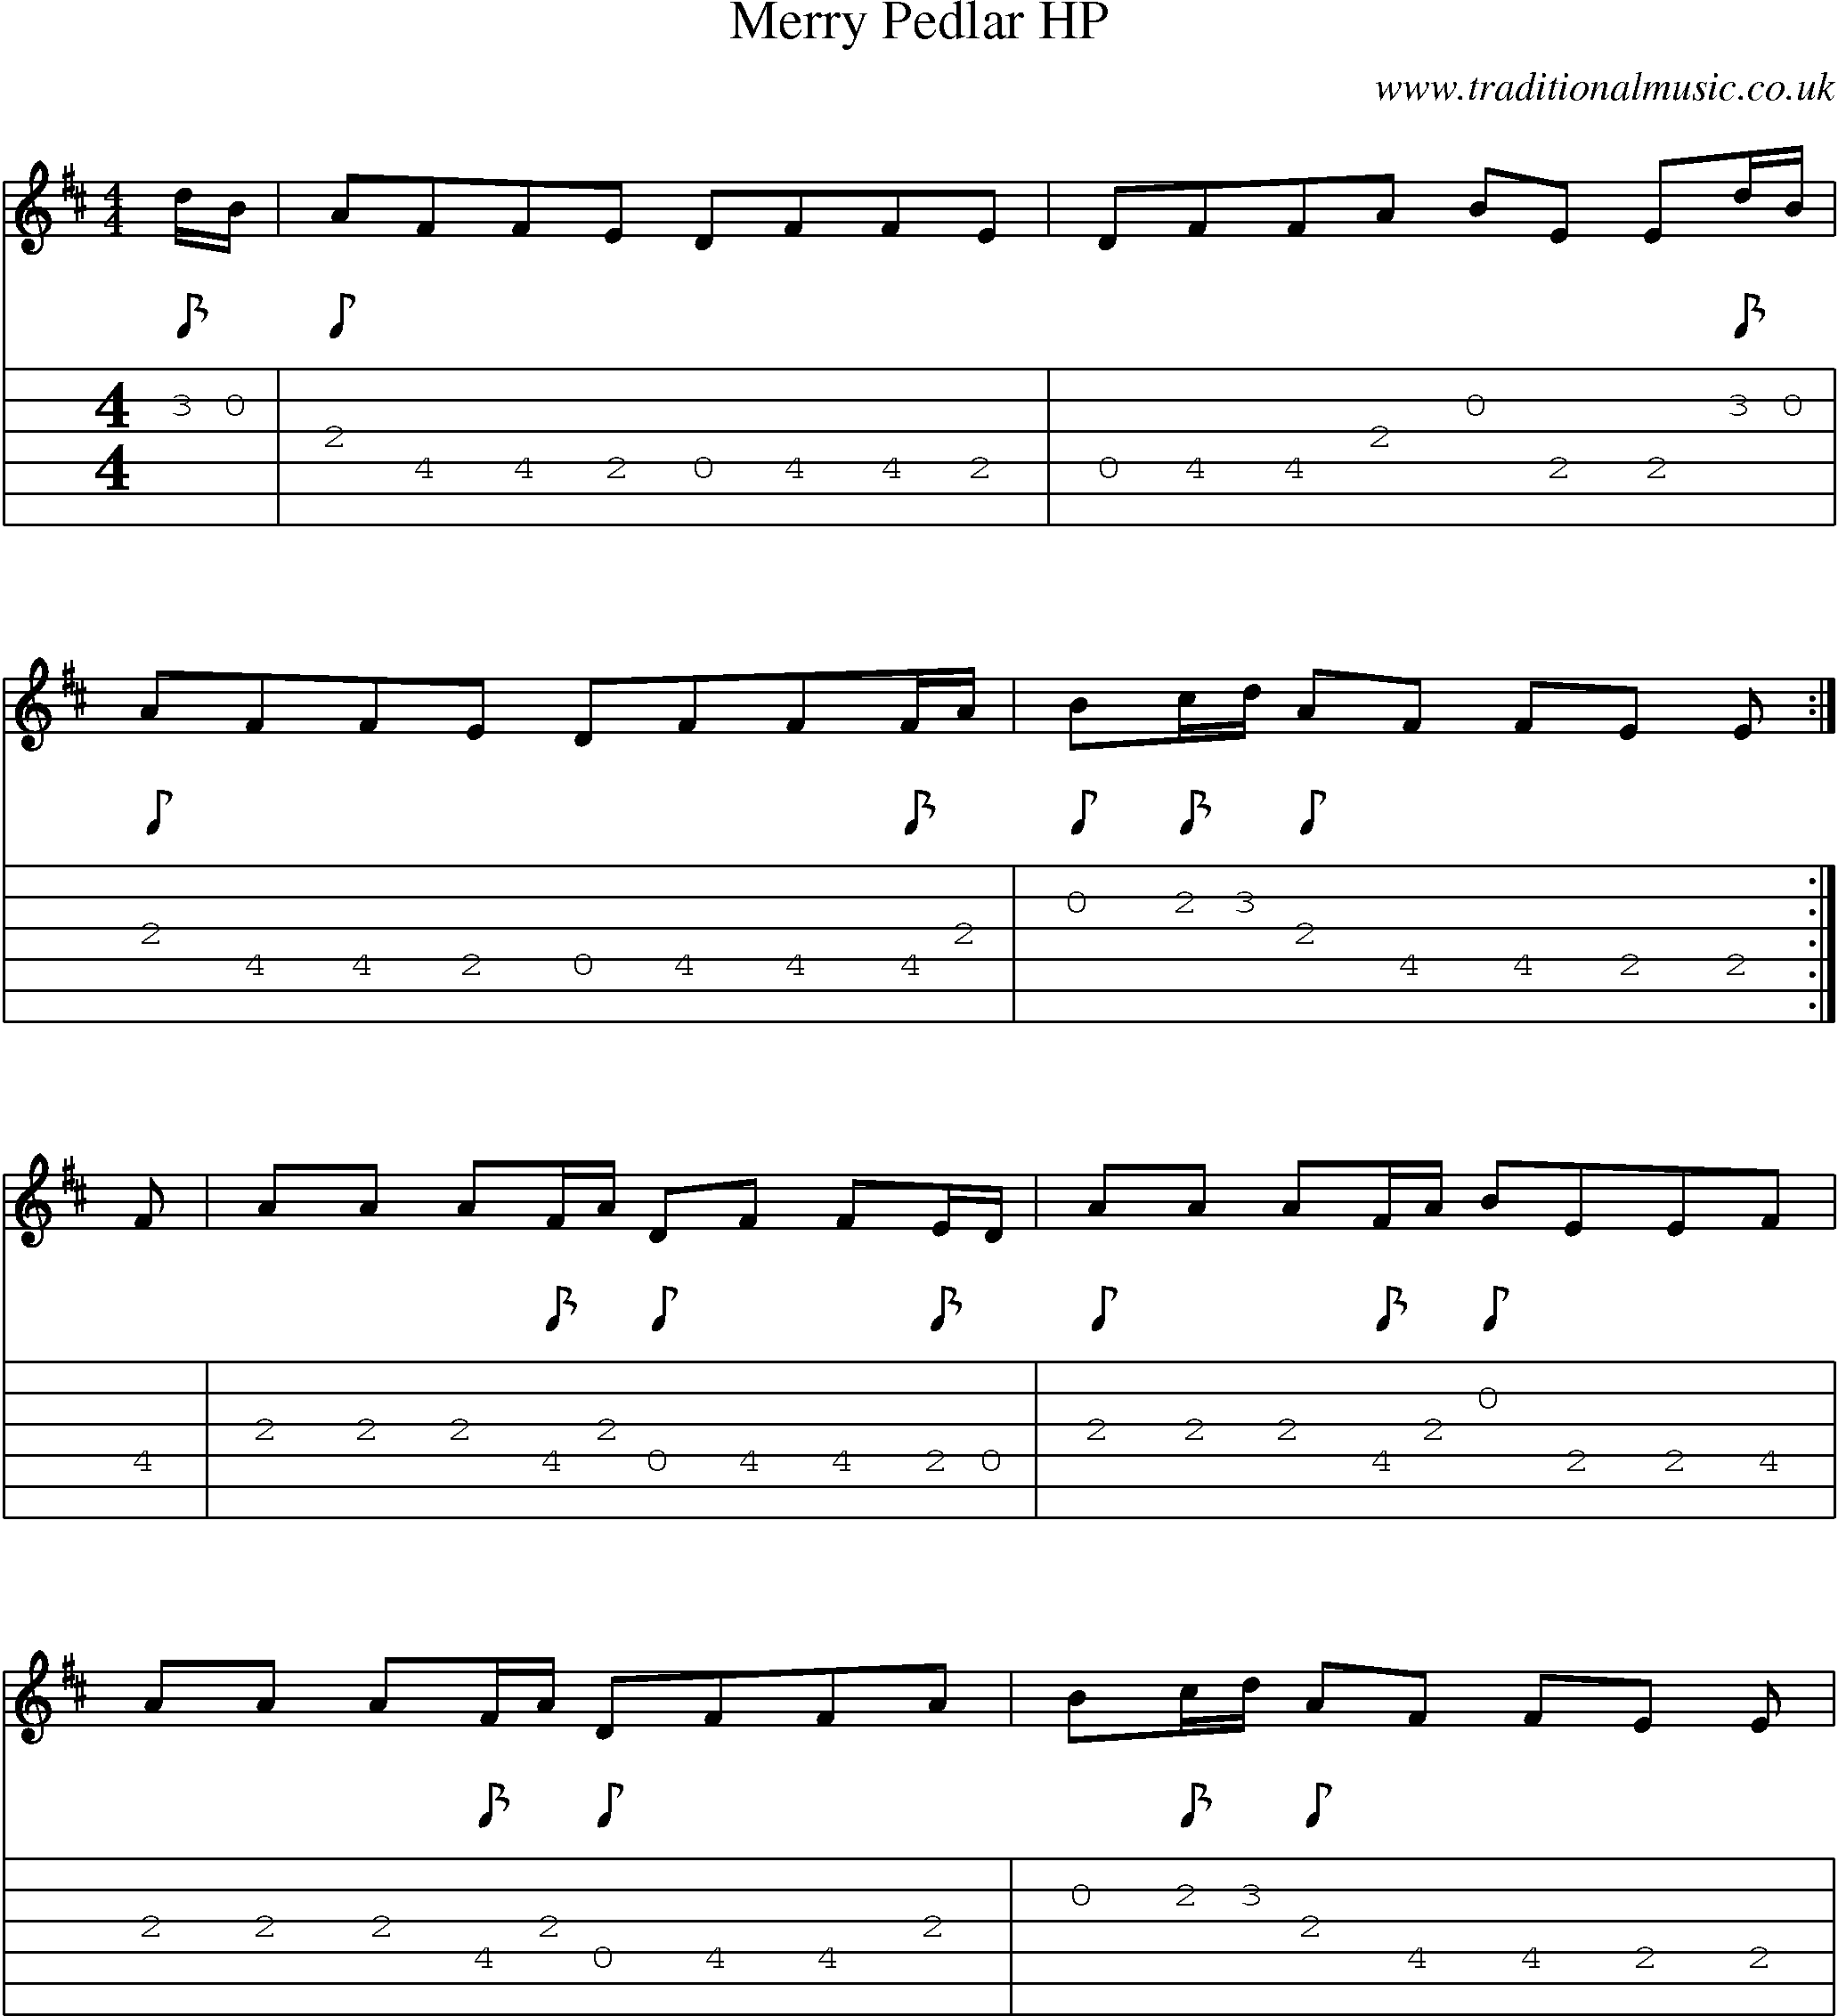 Music Score and Guitar Tabs for Merry Pedlar